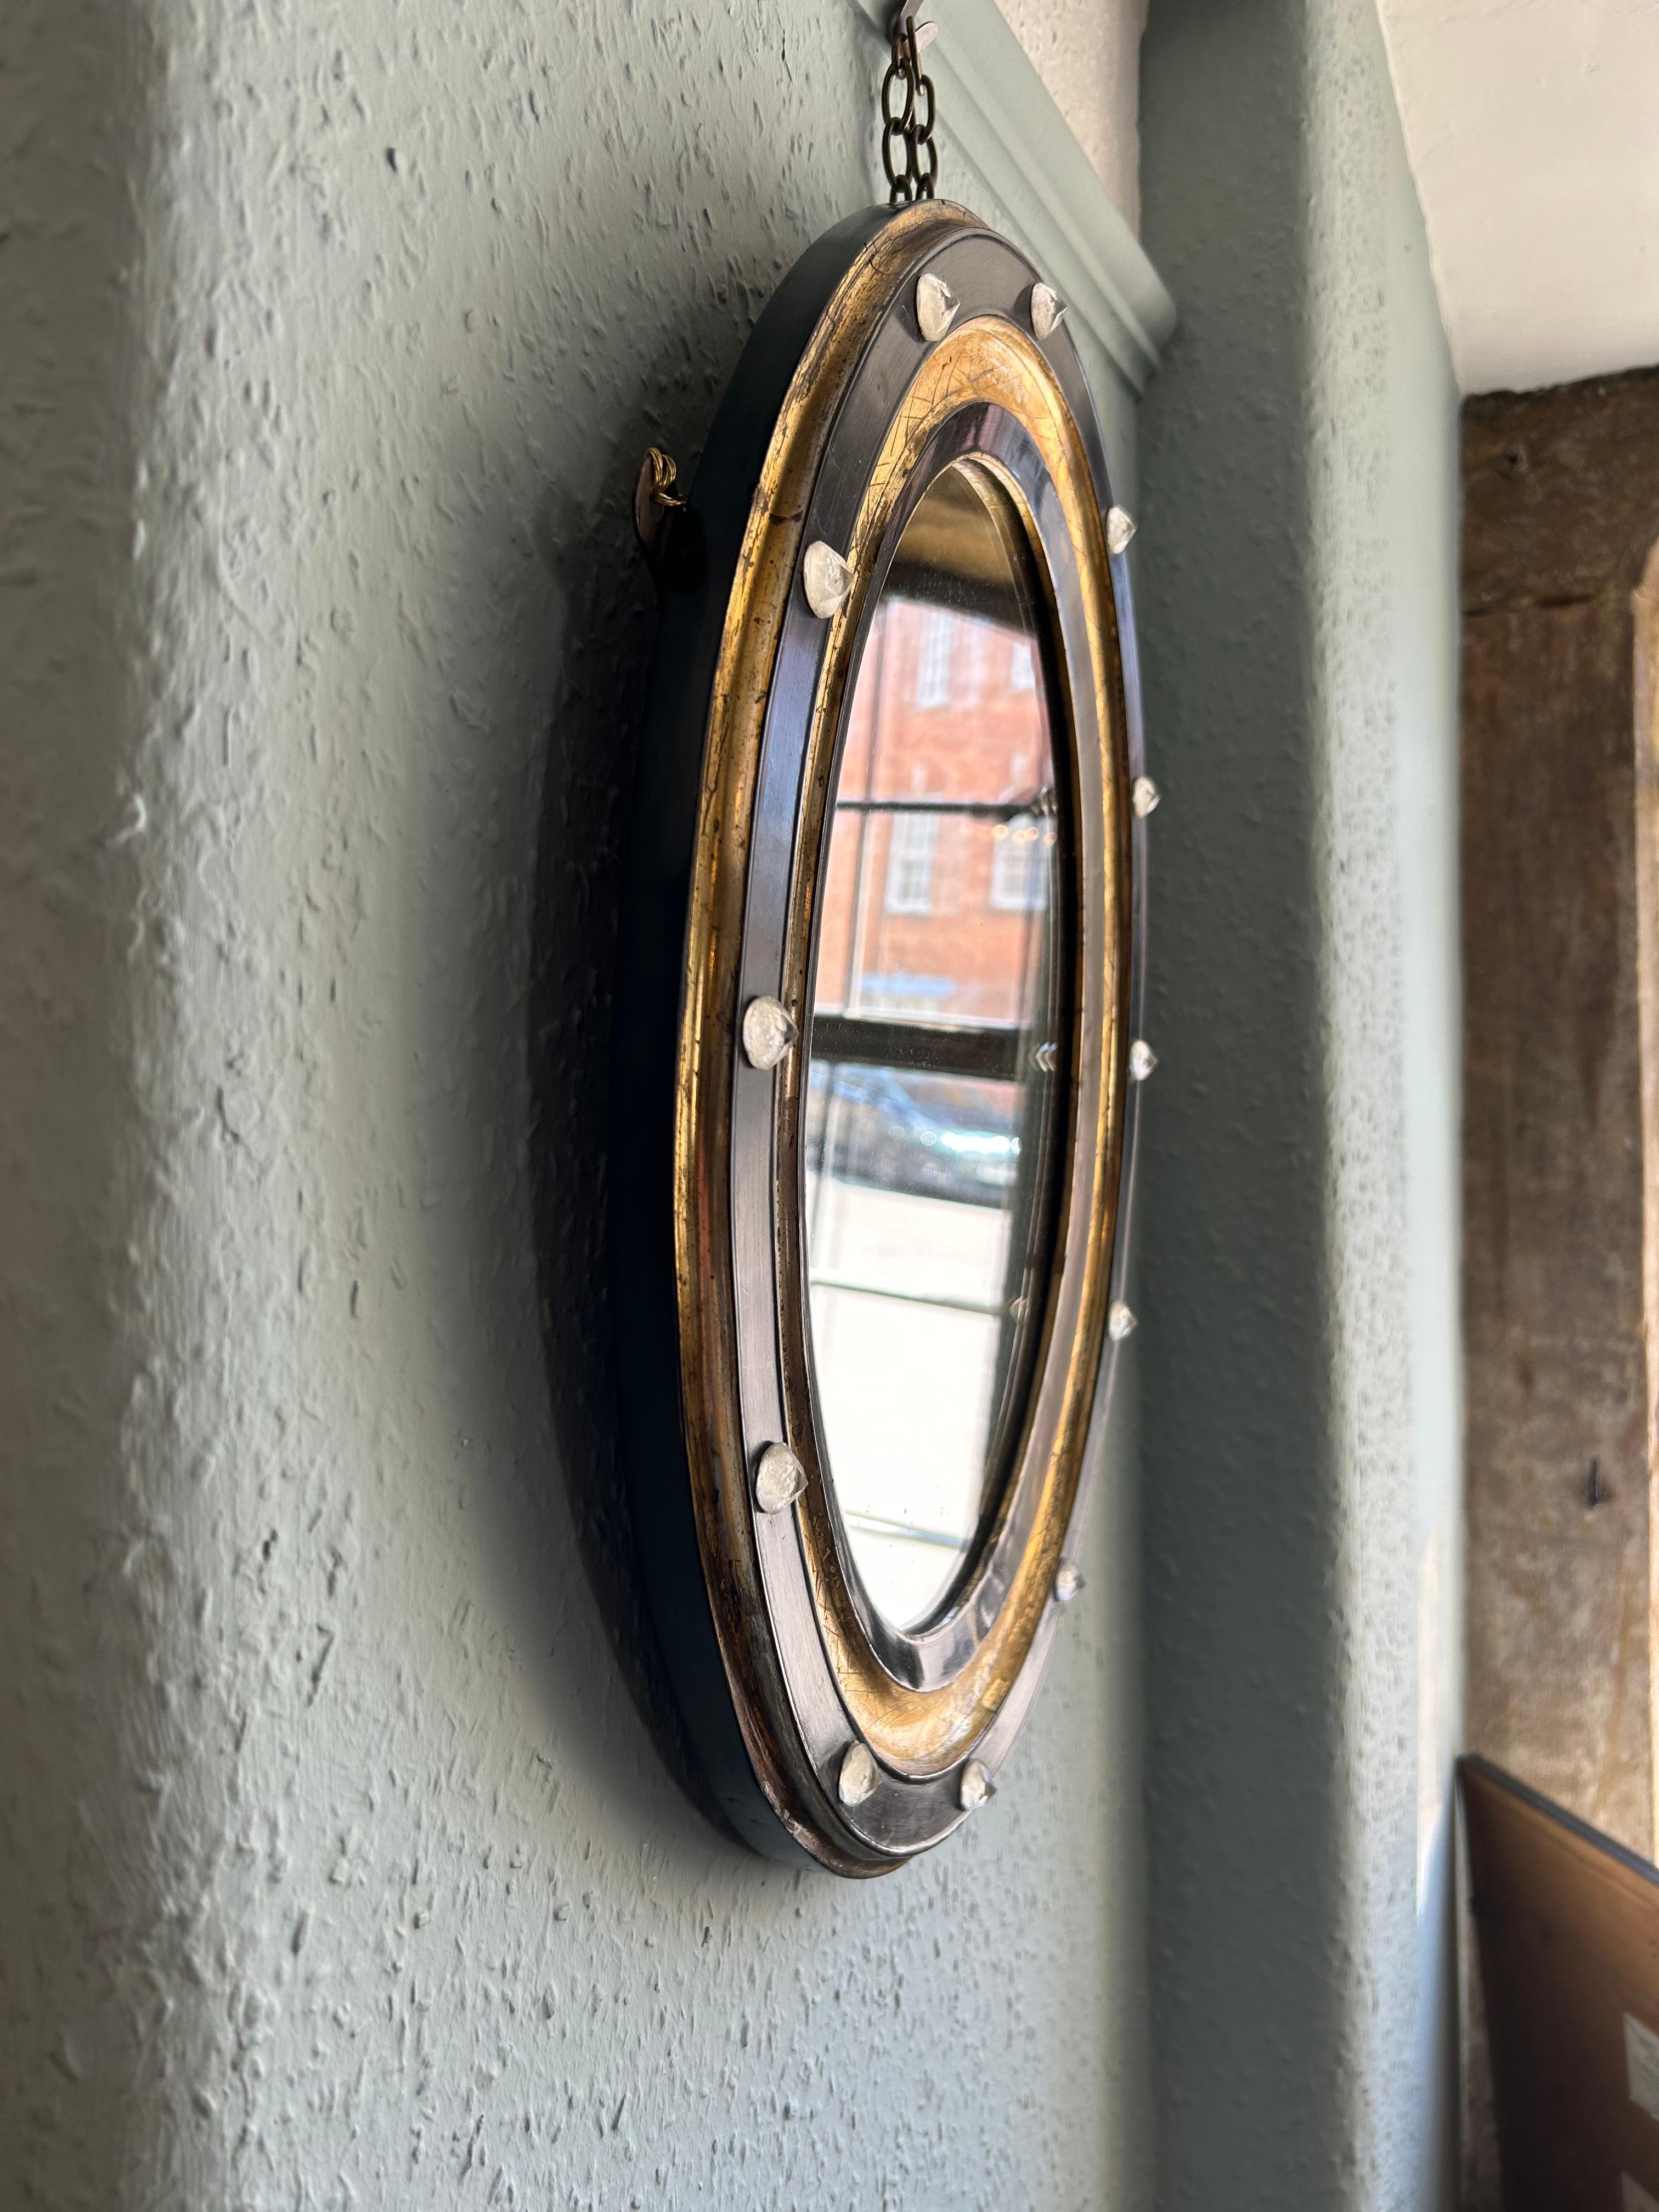 Antique 19th century Irish oval mirror with ebonised & water gilt cross hatched patterned etching & applied cut glass border beads with its original mirror glass, sweet size.